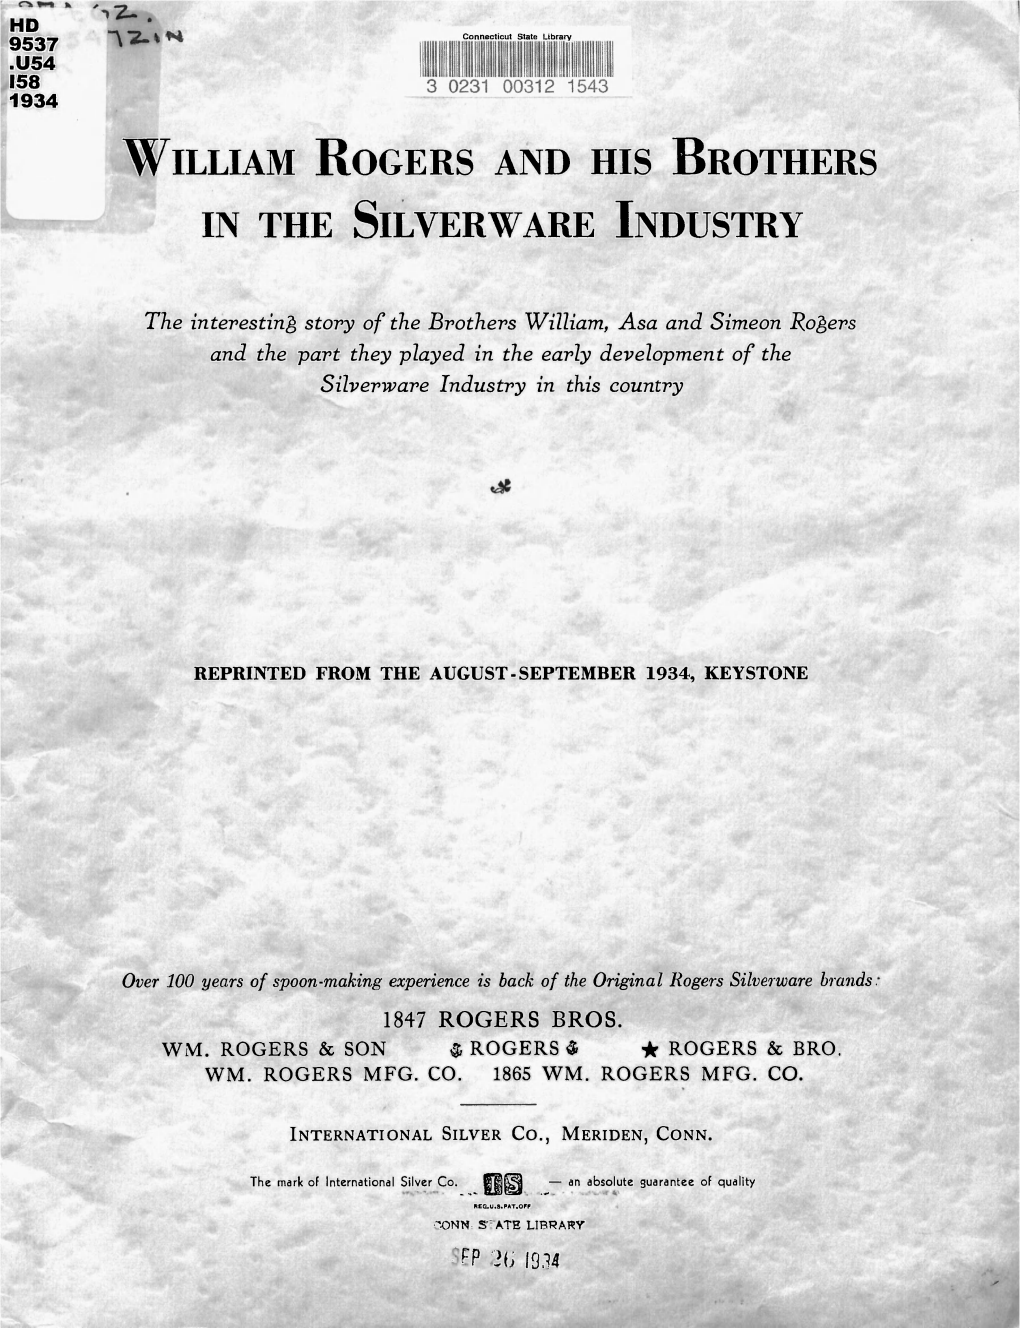 William Rogers and His Brothers in the Silverware Industry